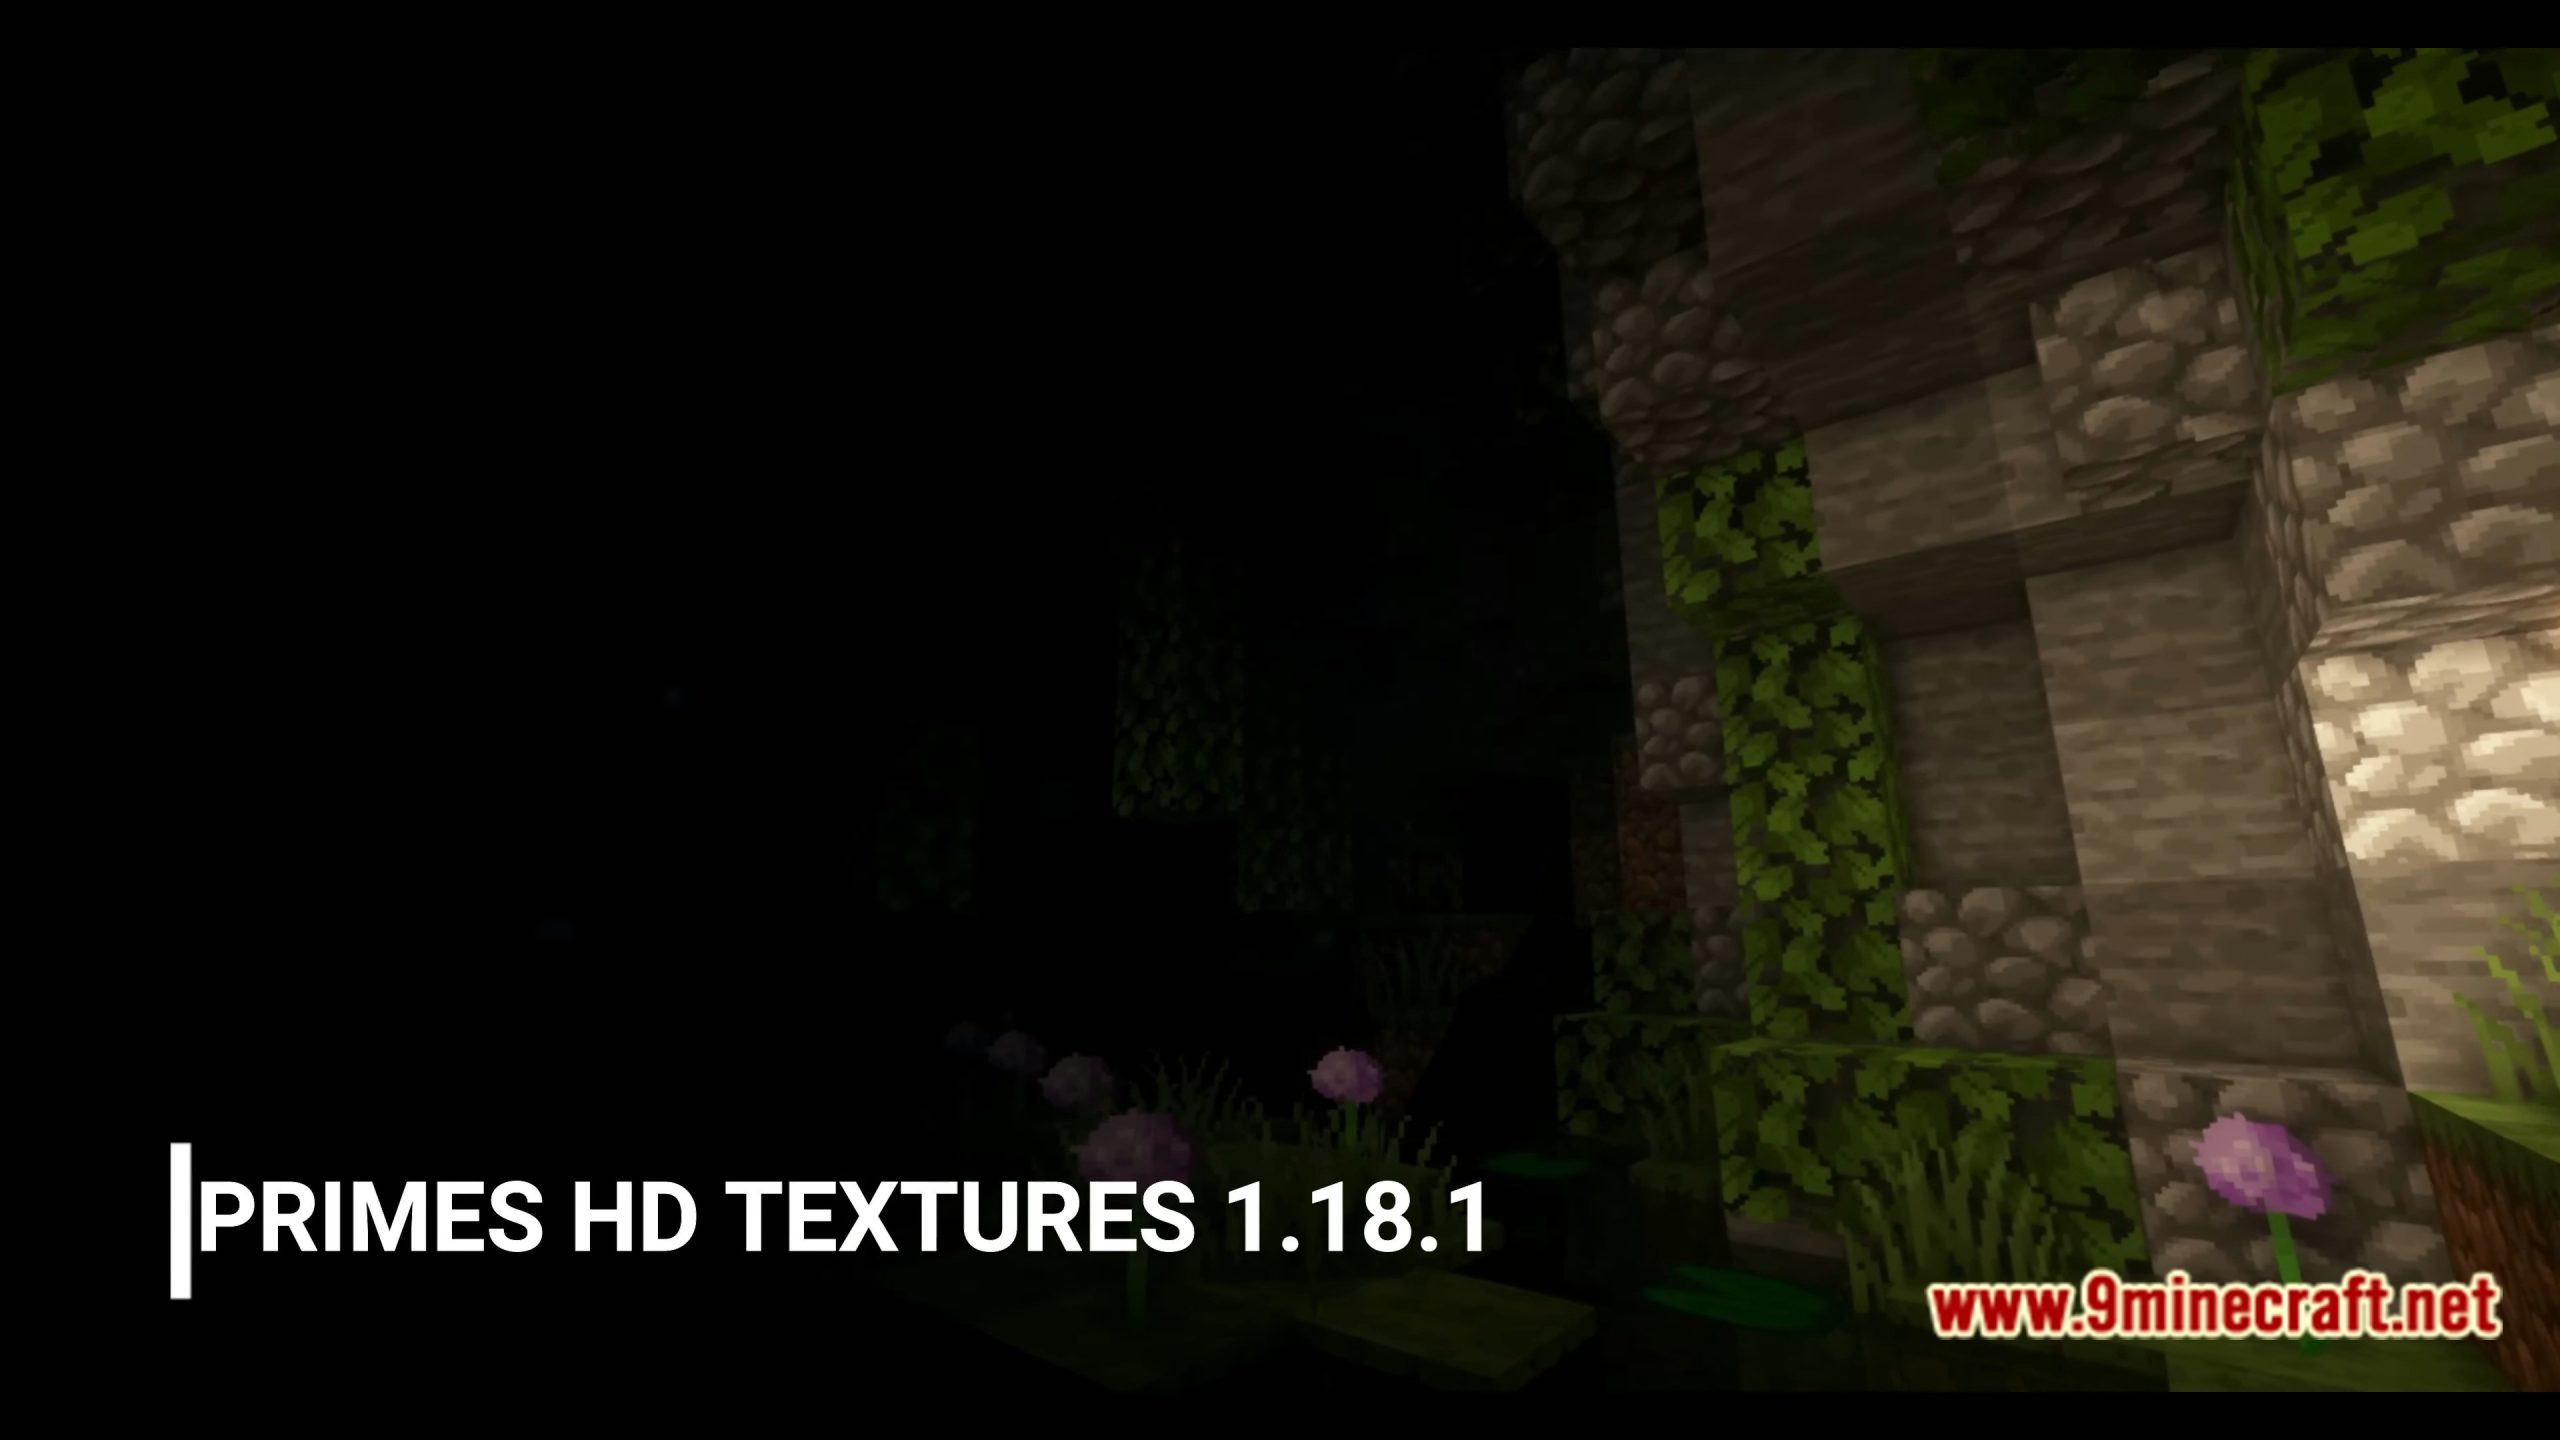 Prime's HD Resource Pack (1.20.2, 1.19.4) - Texture Pack 2